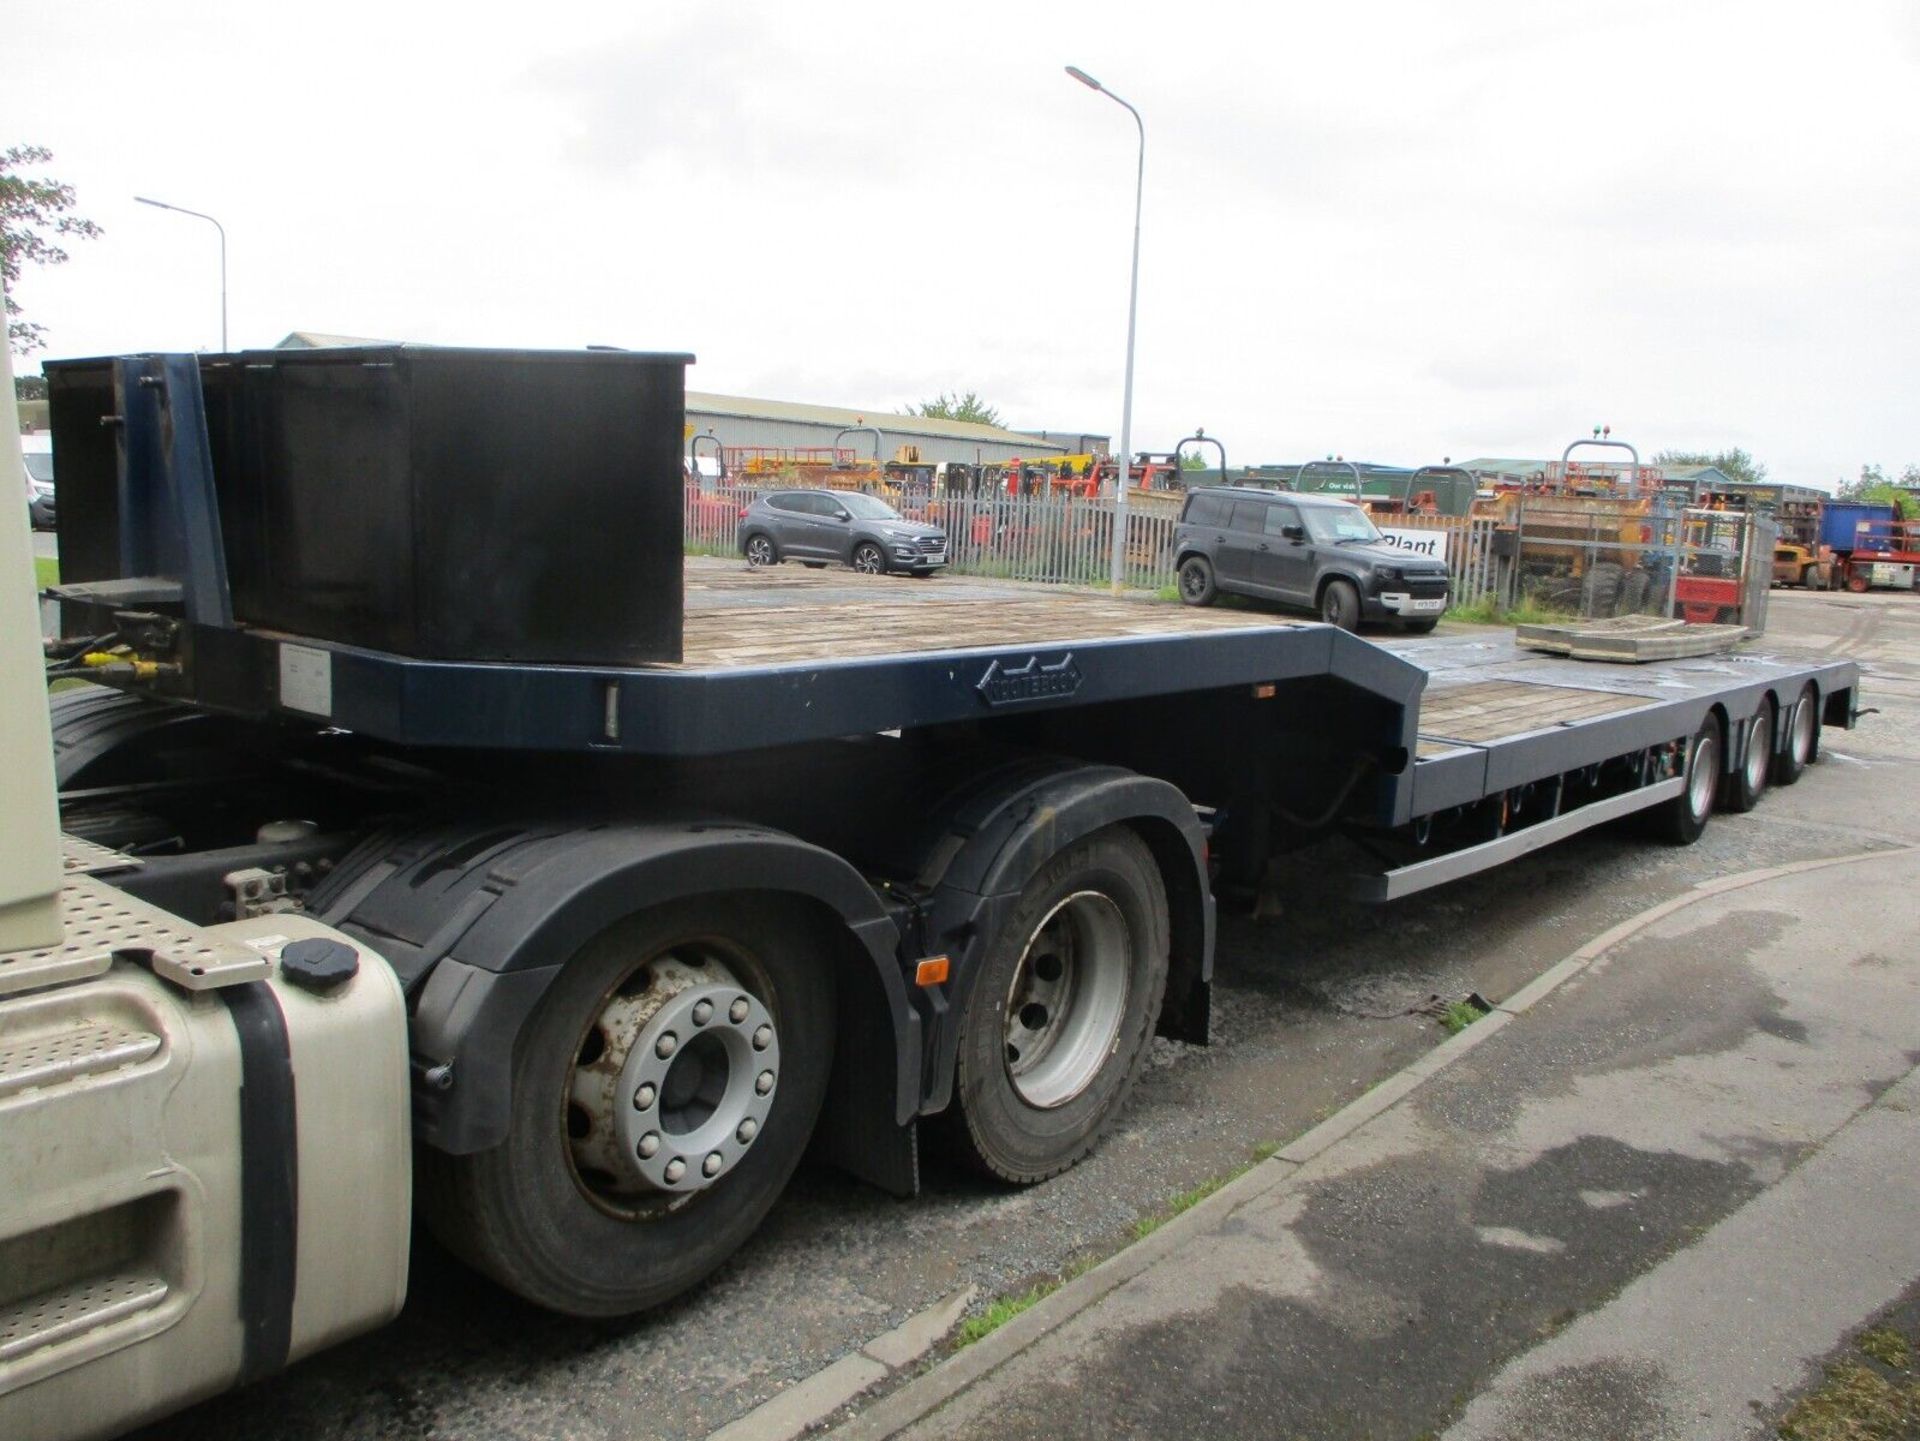 TRANSPORT RELIABILITY: 2006 NOOTEBOOM LOW LOADER - Image 8 of 13